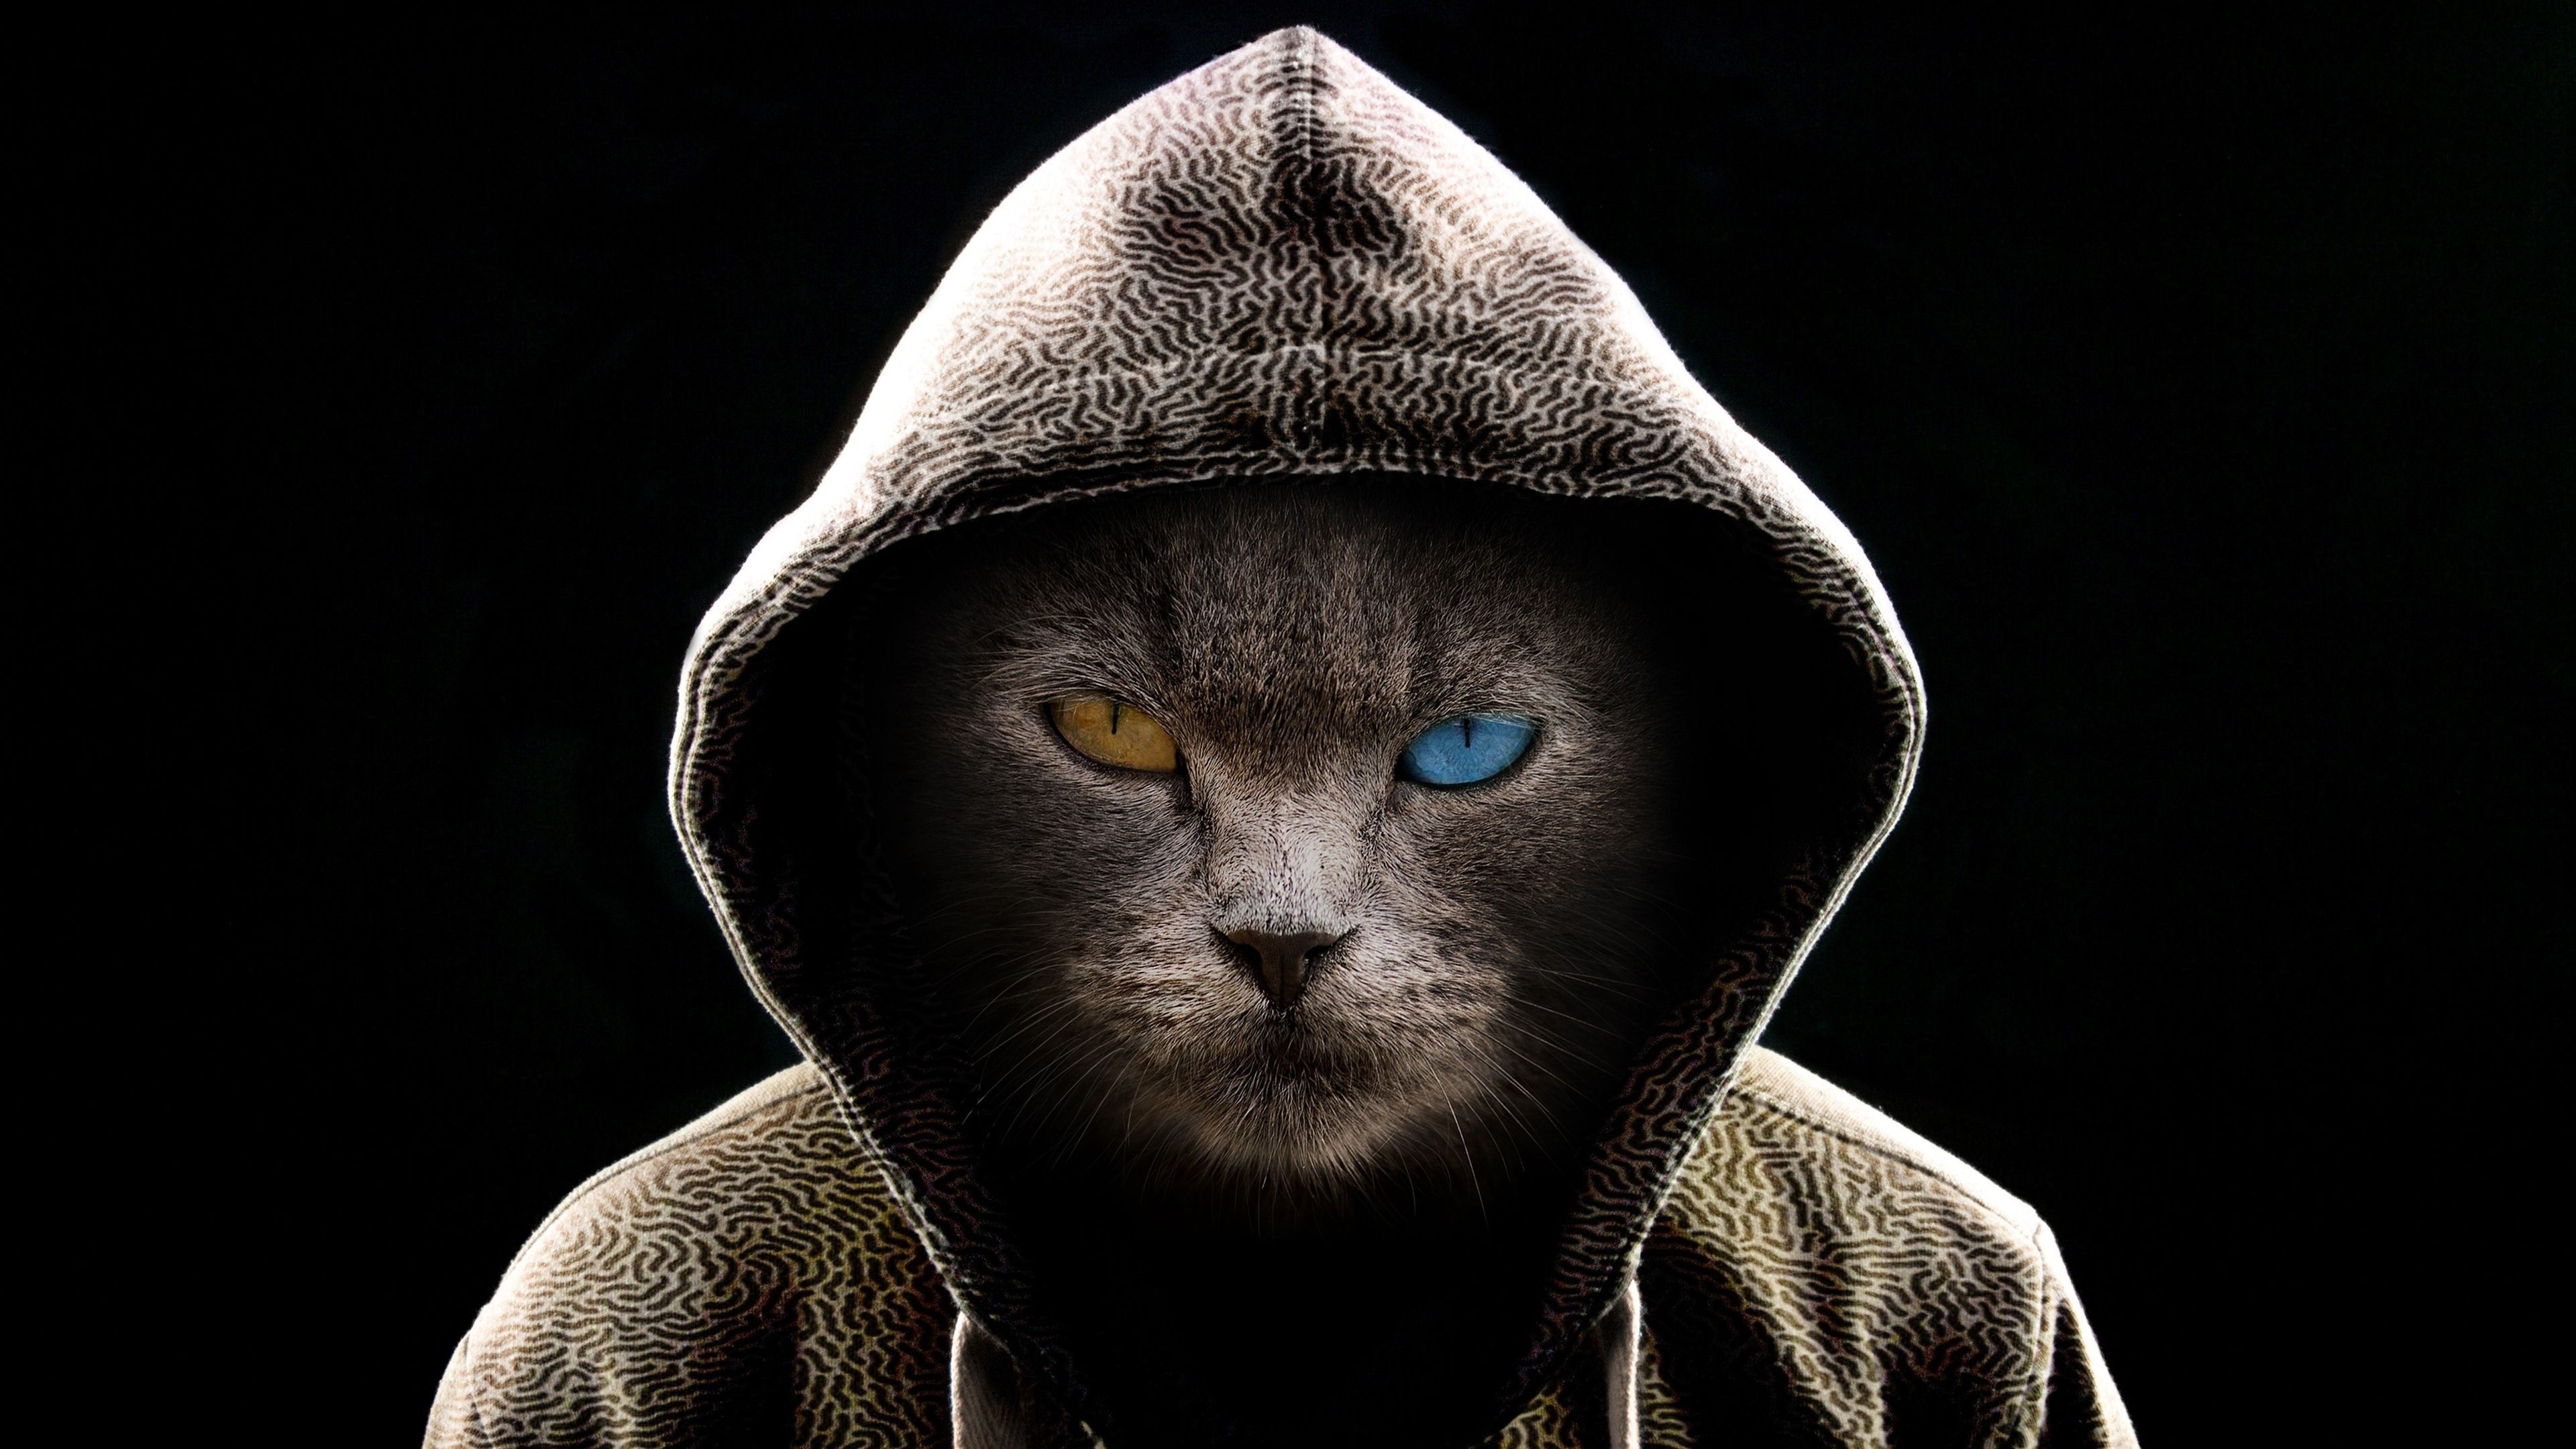 Download 3840x2160 wallpaper cat in hood, colored eyes, 4k, uhd 16: widescreen, 3840x2160 HD image, background, 23029